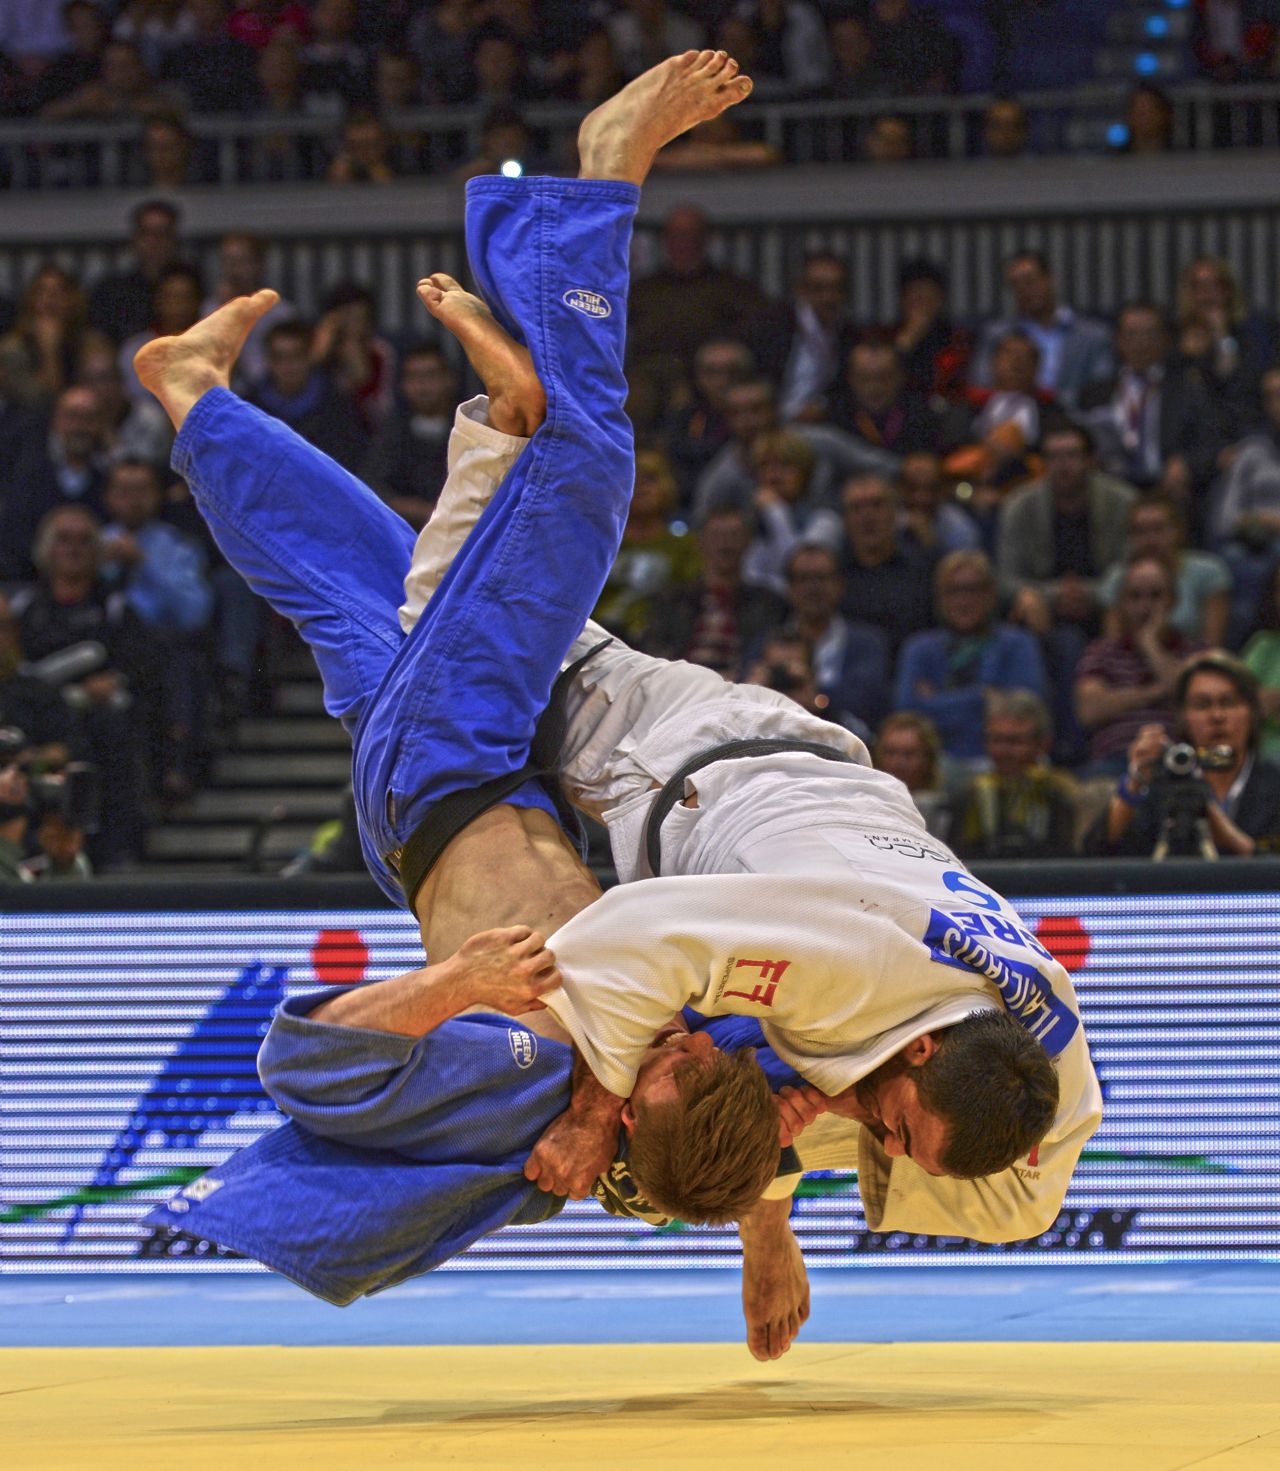 "Not such an historic moment, but one of my favorite action shots ever. Both men clear of the mat, in mid air, this is Iliadis throwing Noel Van T End with Uchi Mata to win the 2014 Dusseldorf Grand Prix."